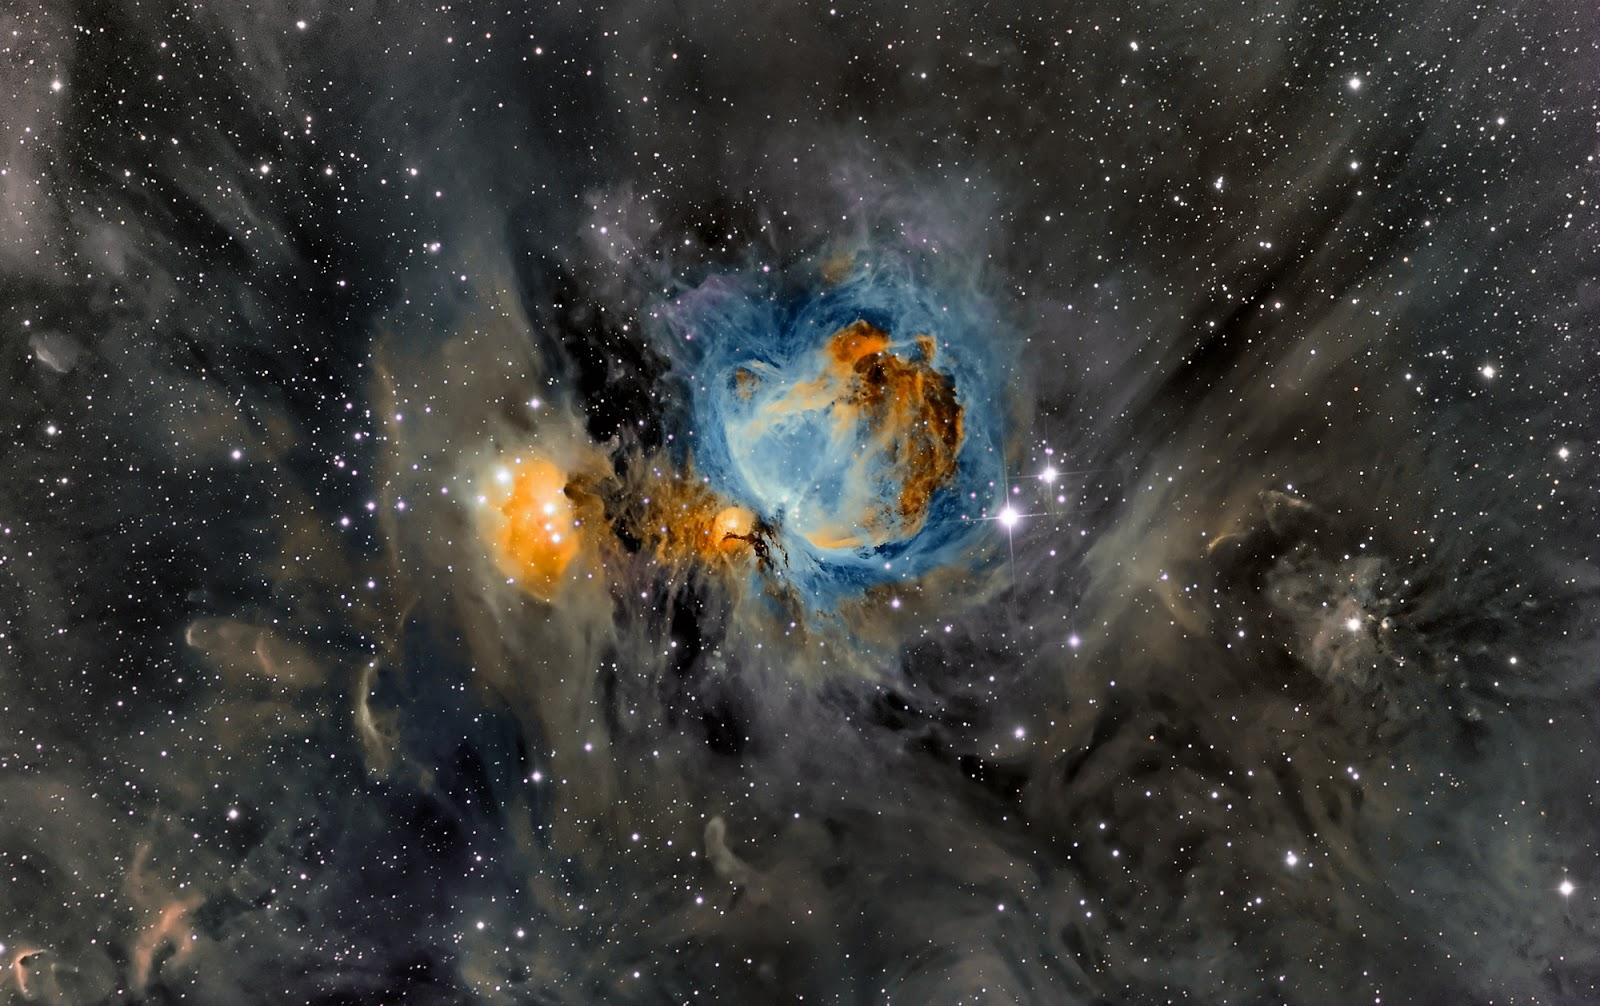 Collection of Orion Nebula Wallpaper (image in Collection)